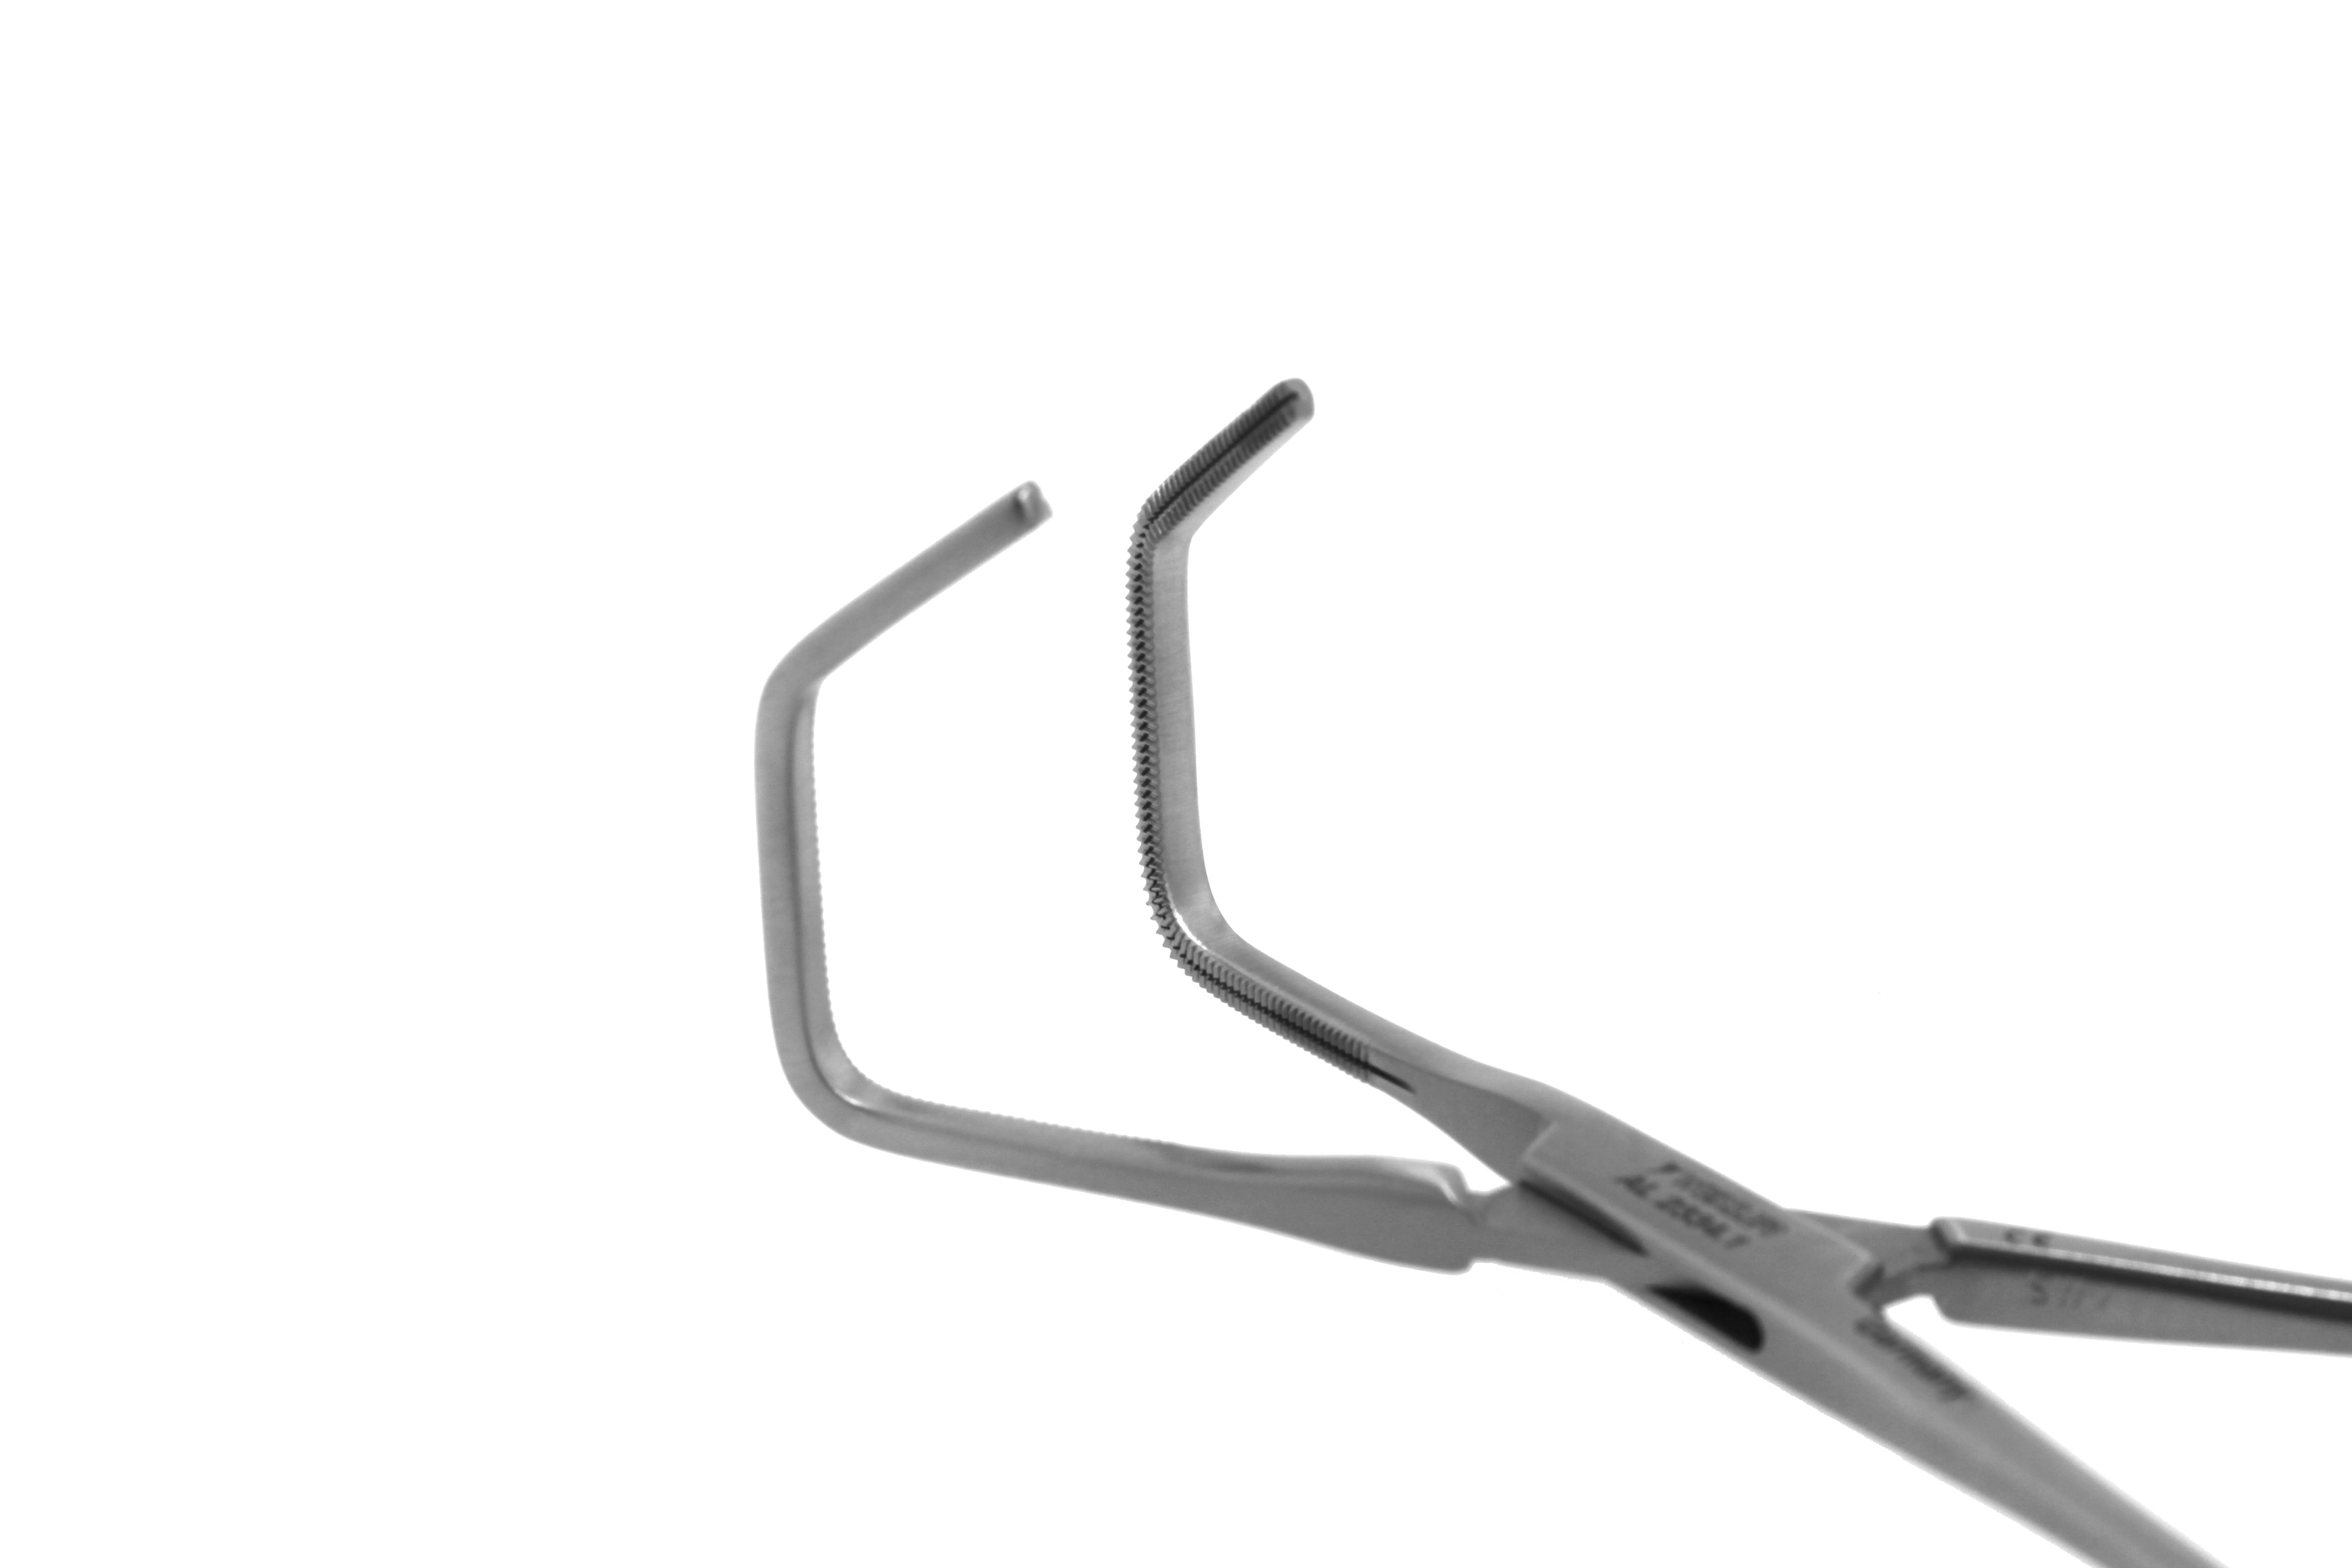 Wexler Baby Vascular Clamps - Angled Cooley Atraumatic jaws